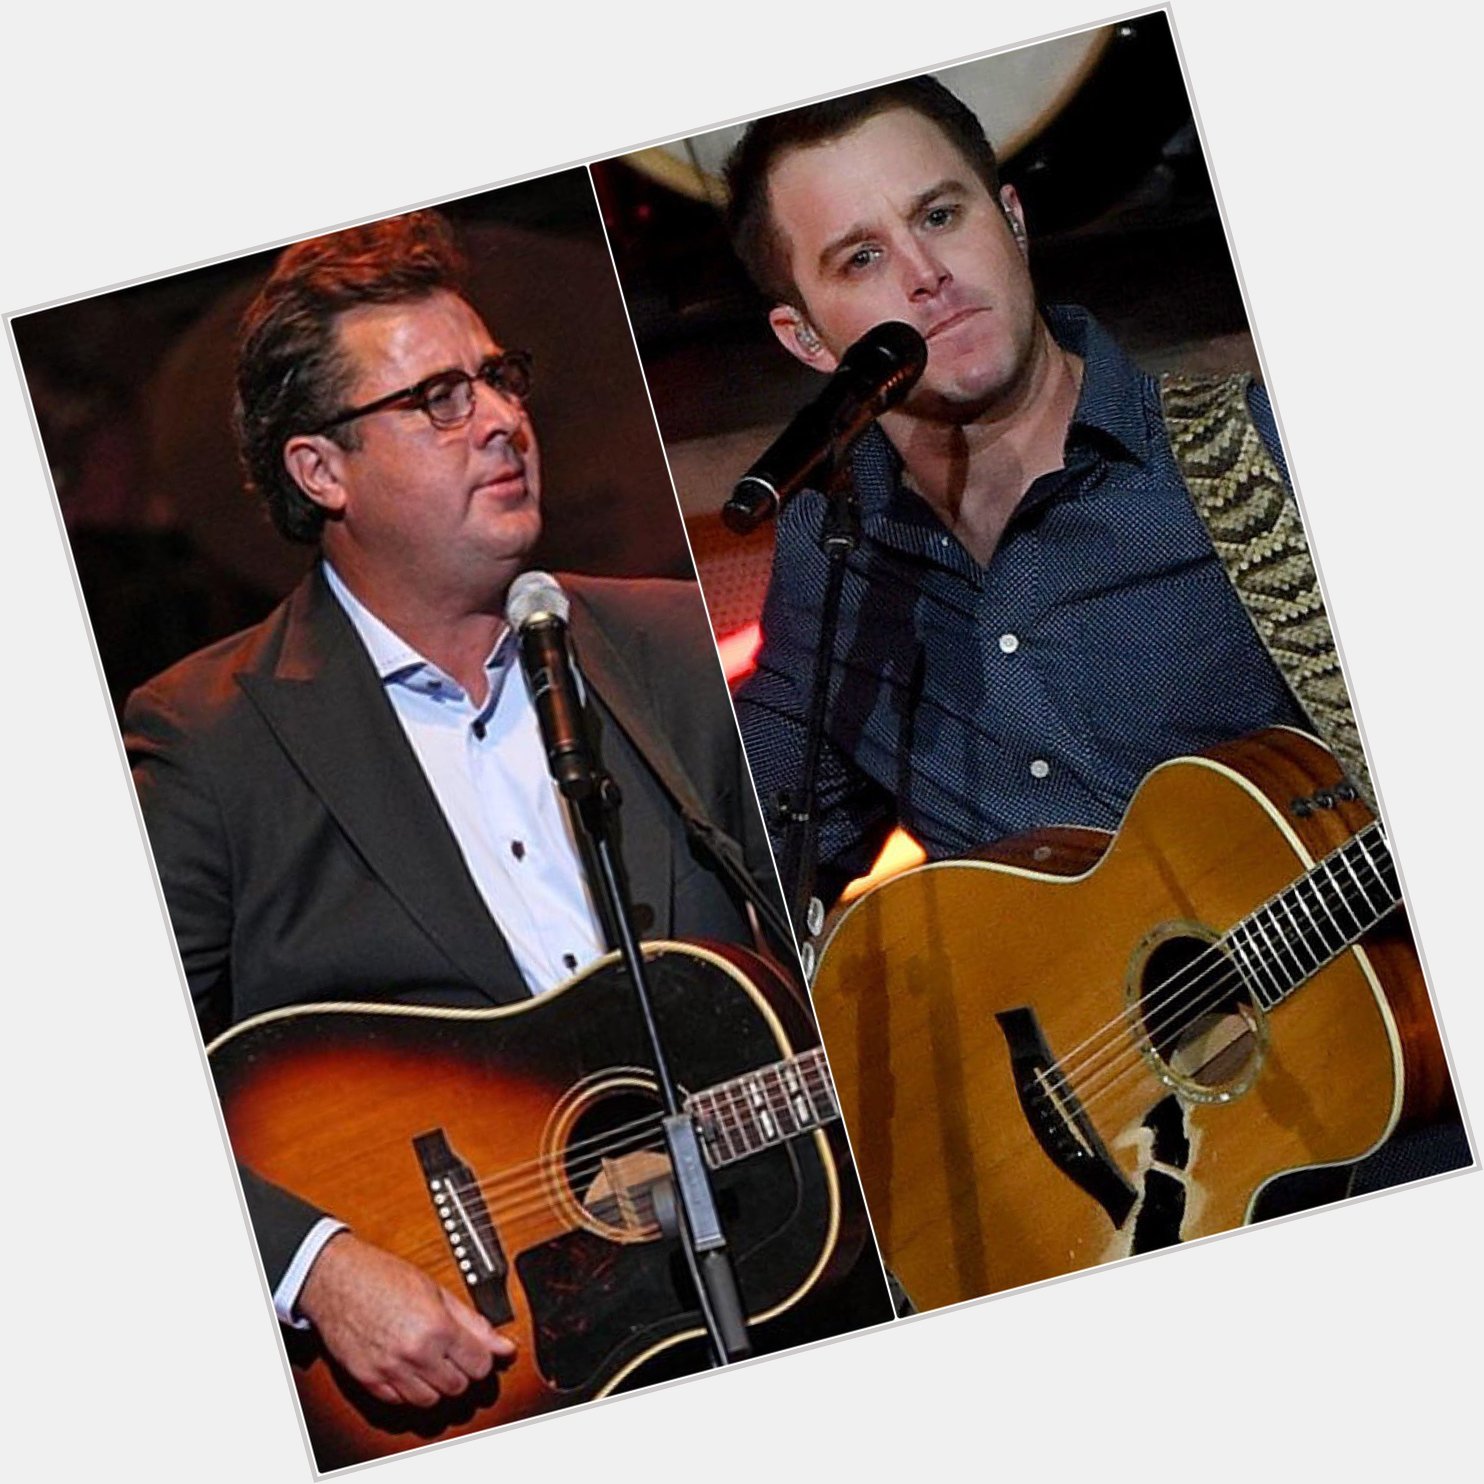 Happy birthday to Vince Gill and Easton Corbin! 